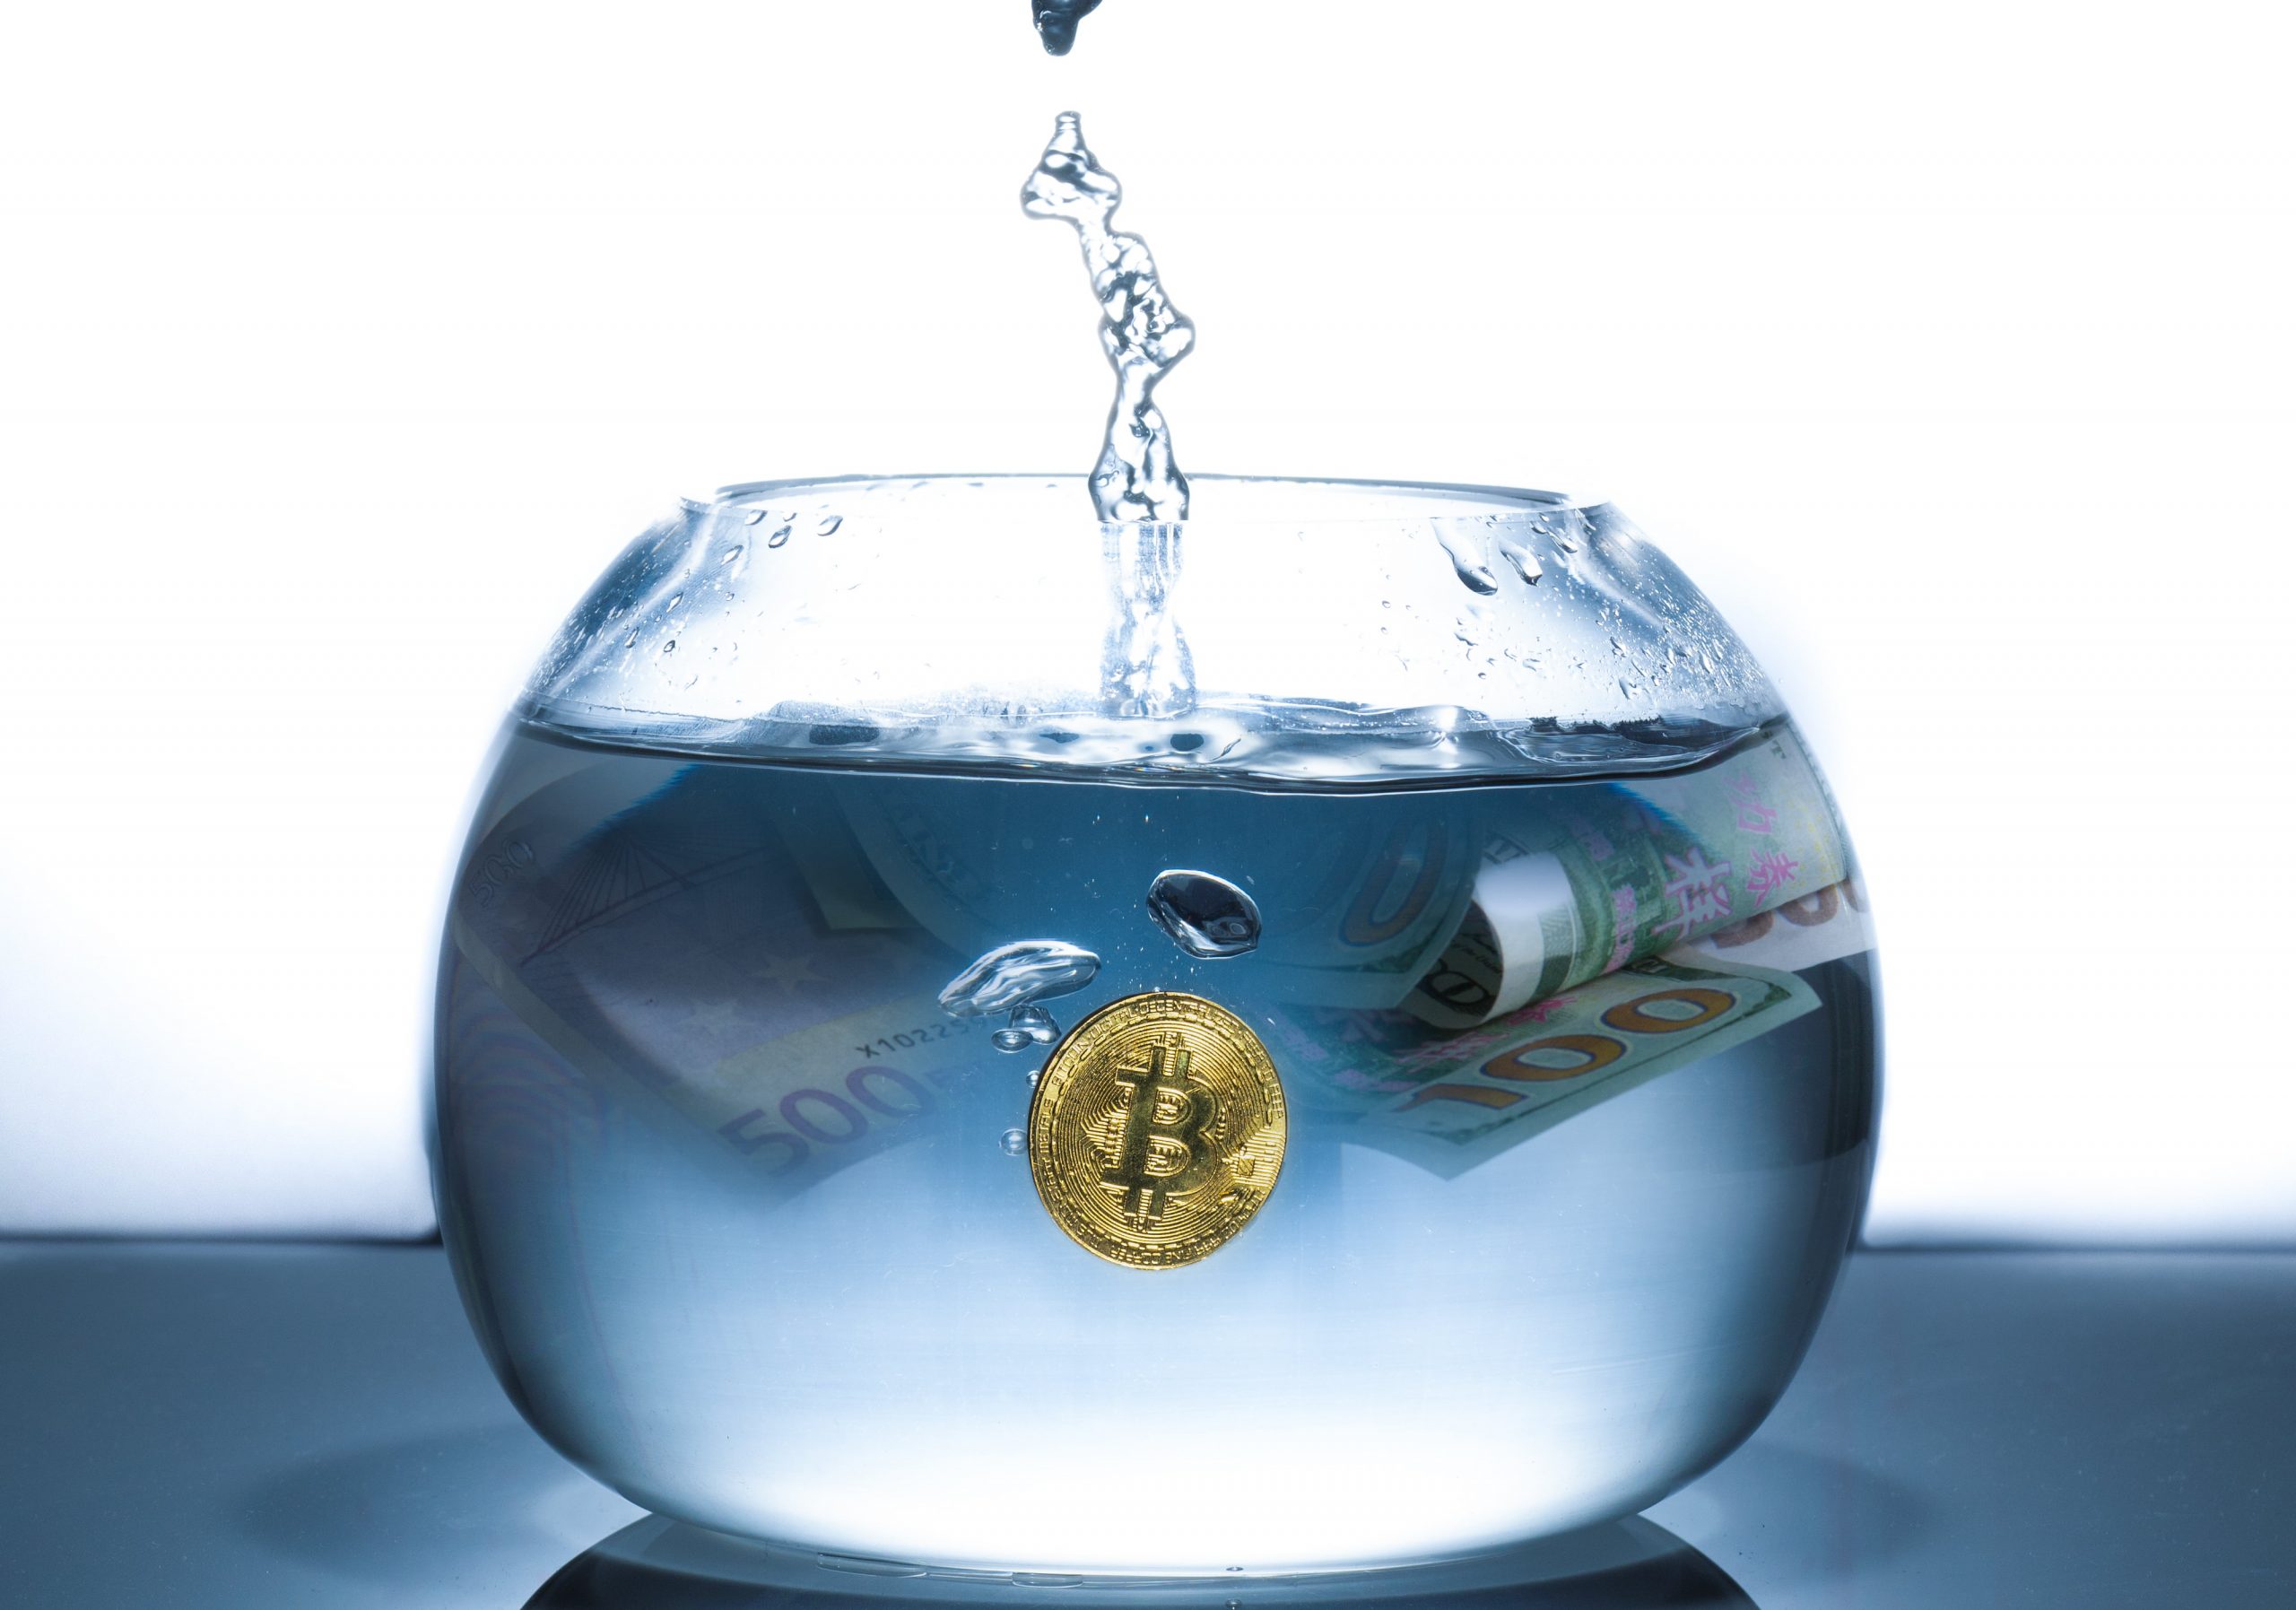 A bitcoin coin and $100 currency in a bowl being filled with water